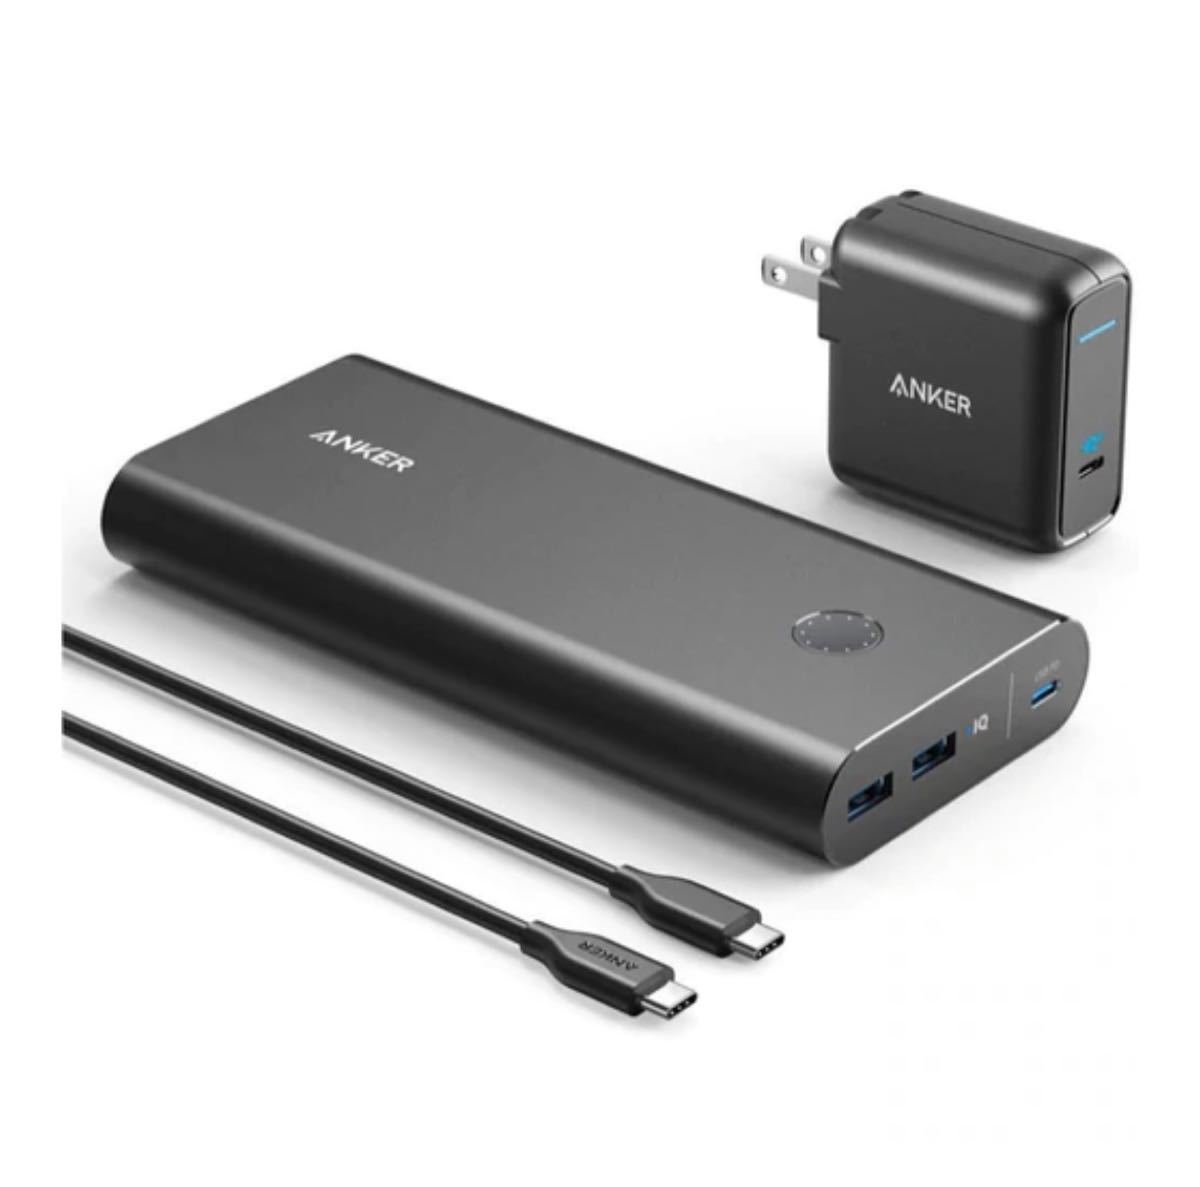 Anker powercore26800 Pd 45 w 充電器 モバイルバッテリー PowerCore